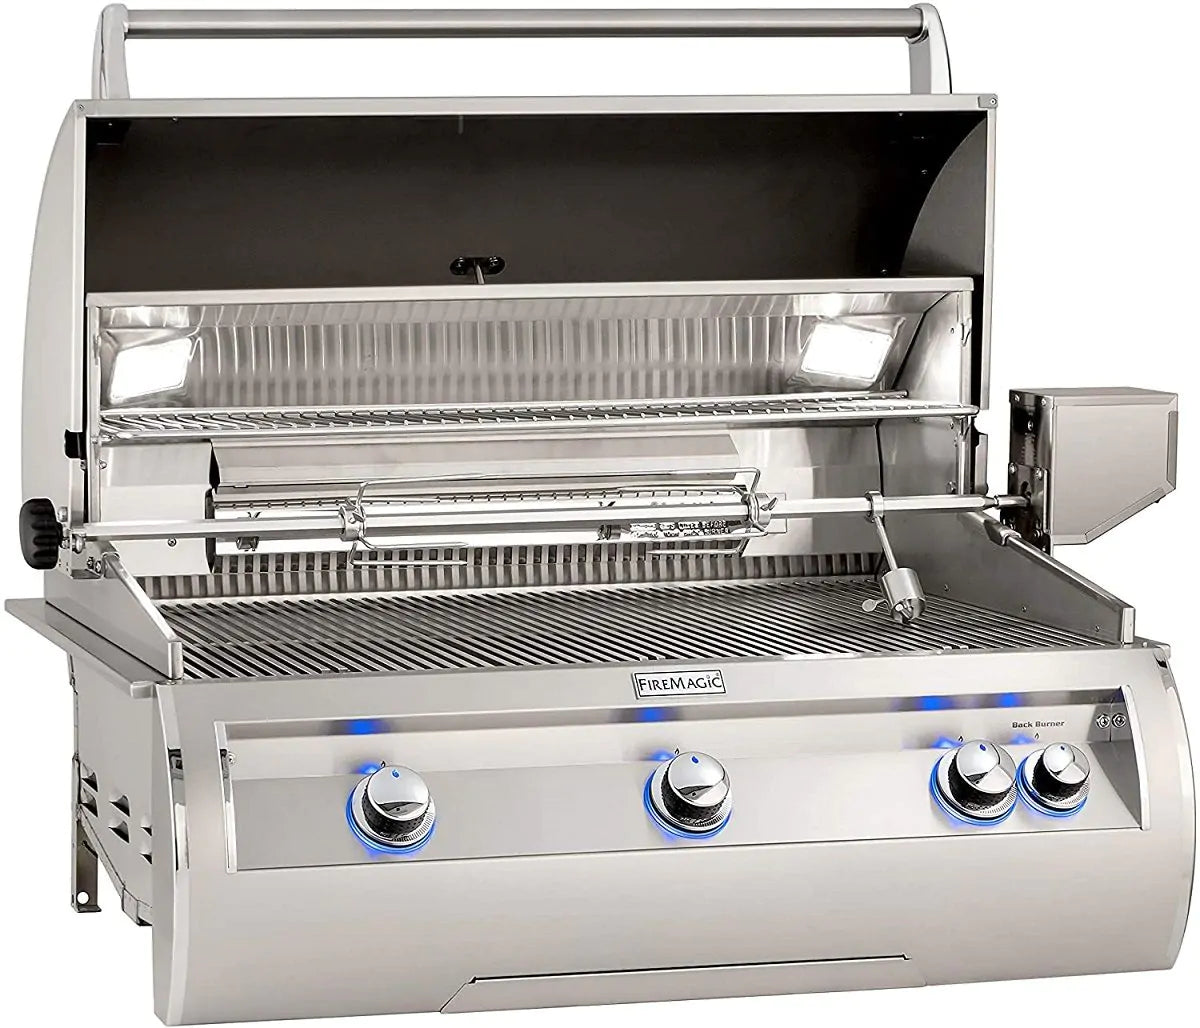 Fire Magic Echelon Diamond 36 Inch 3 Burner Built-In Gas Grill with Rotisserie and Analog Thermometer